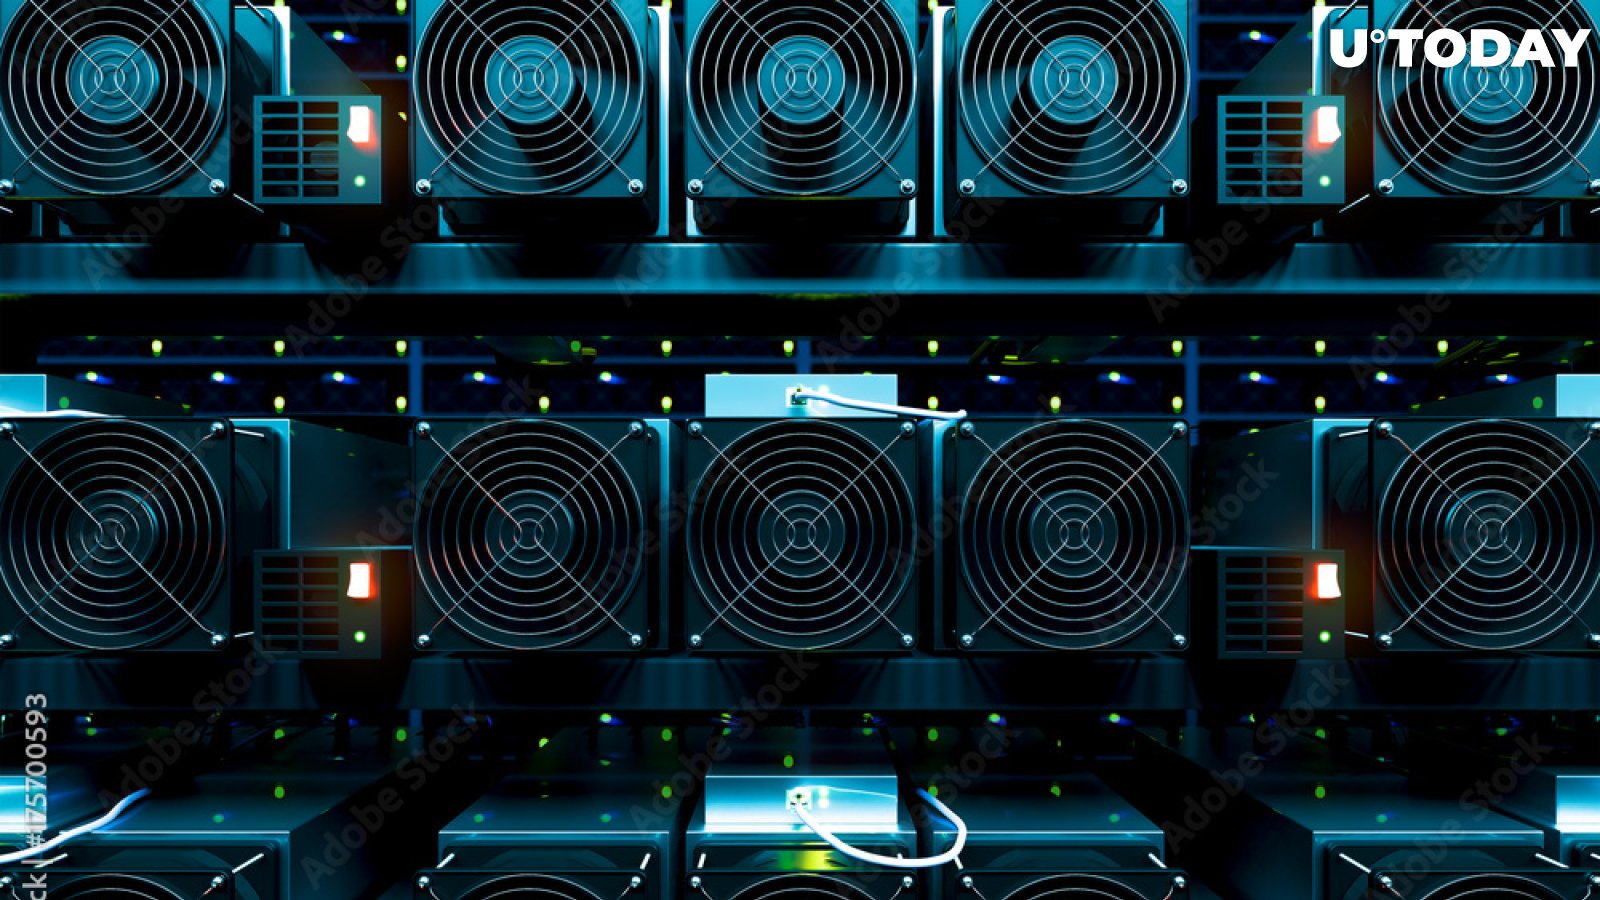 Bitcoin Mining Difficulty Drops Rapidly and Its Worrying, Here's Why